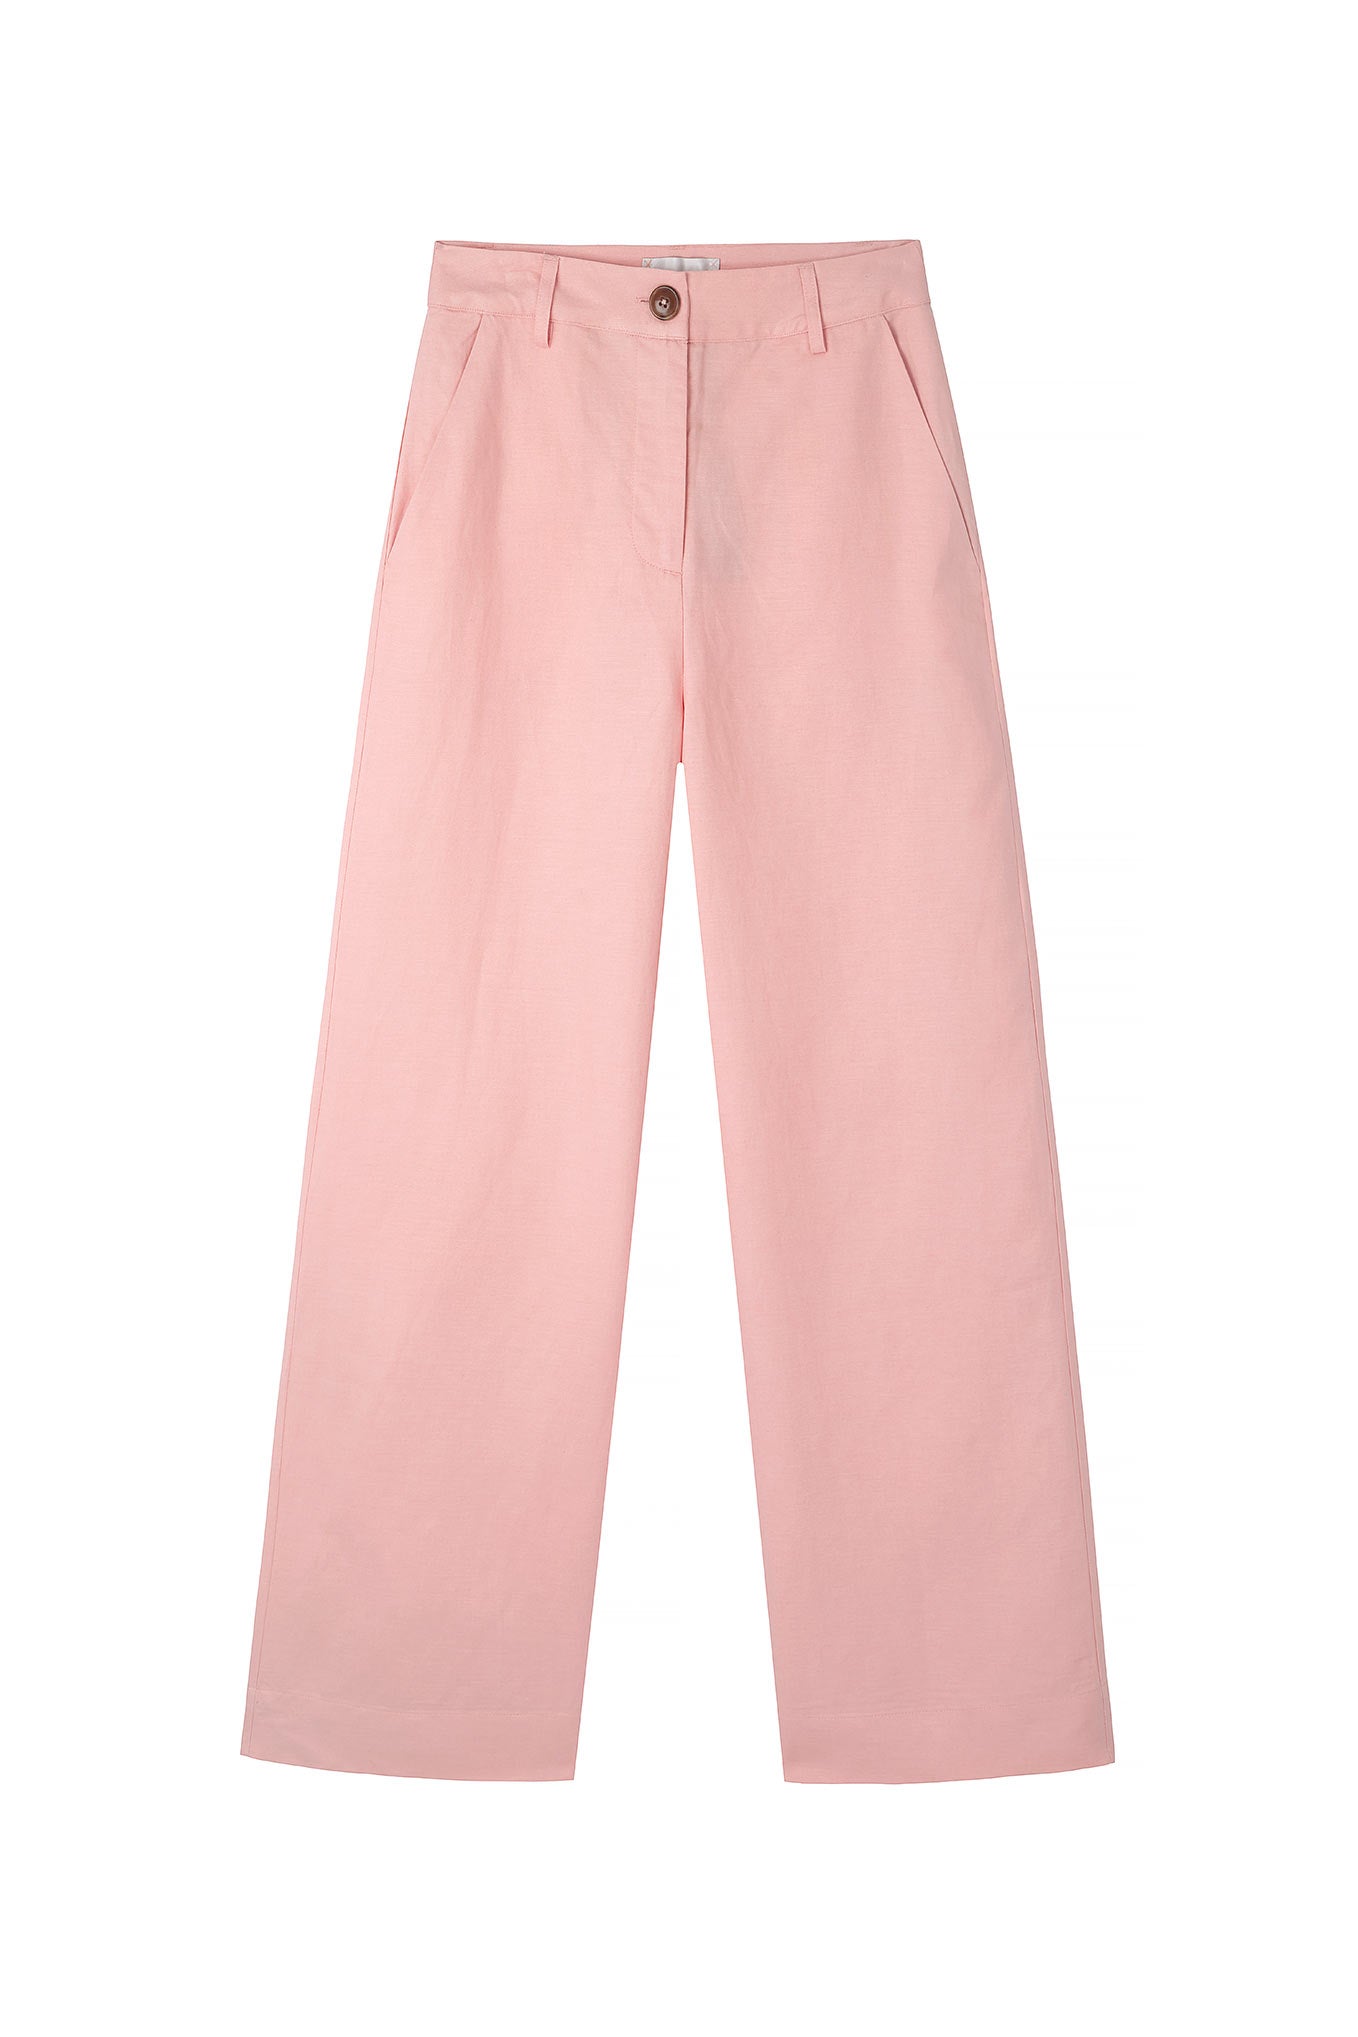 EF x Wyse Tailored Suit Trouser - Rose Pink — WYSE London